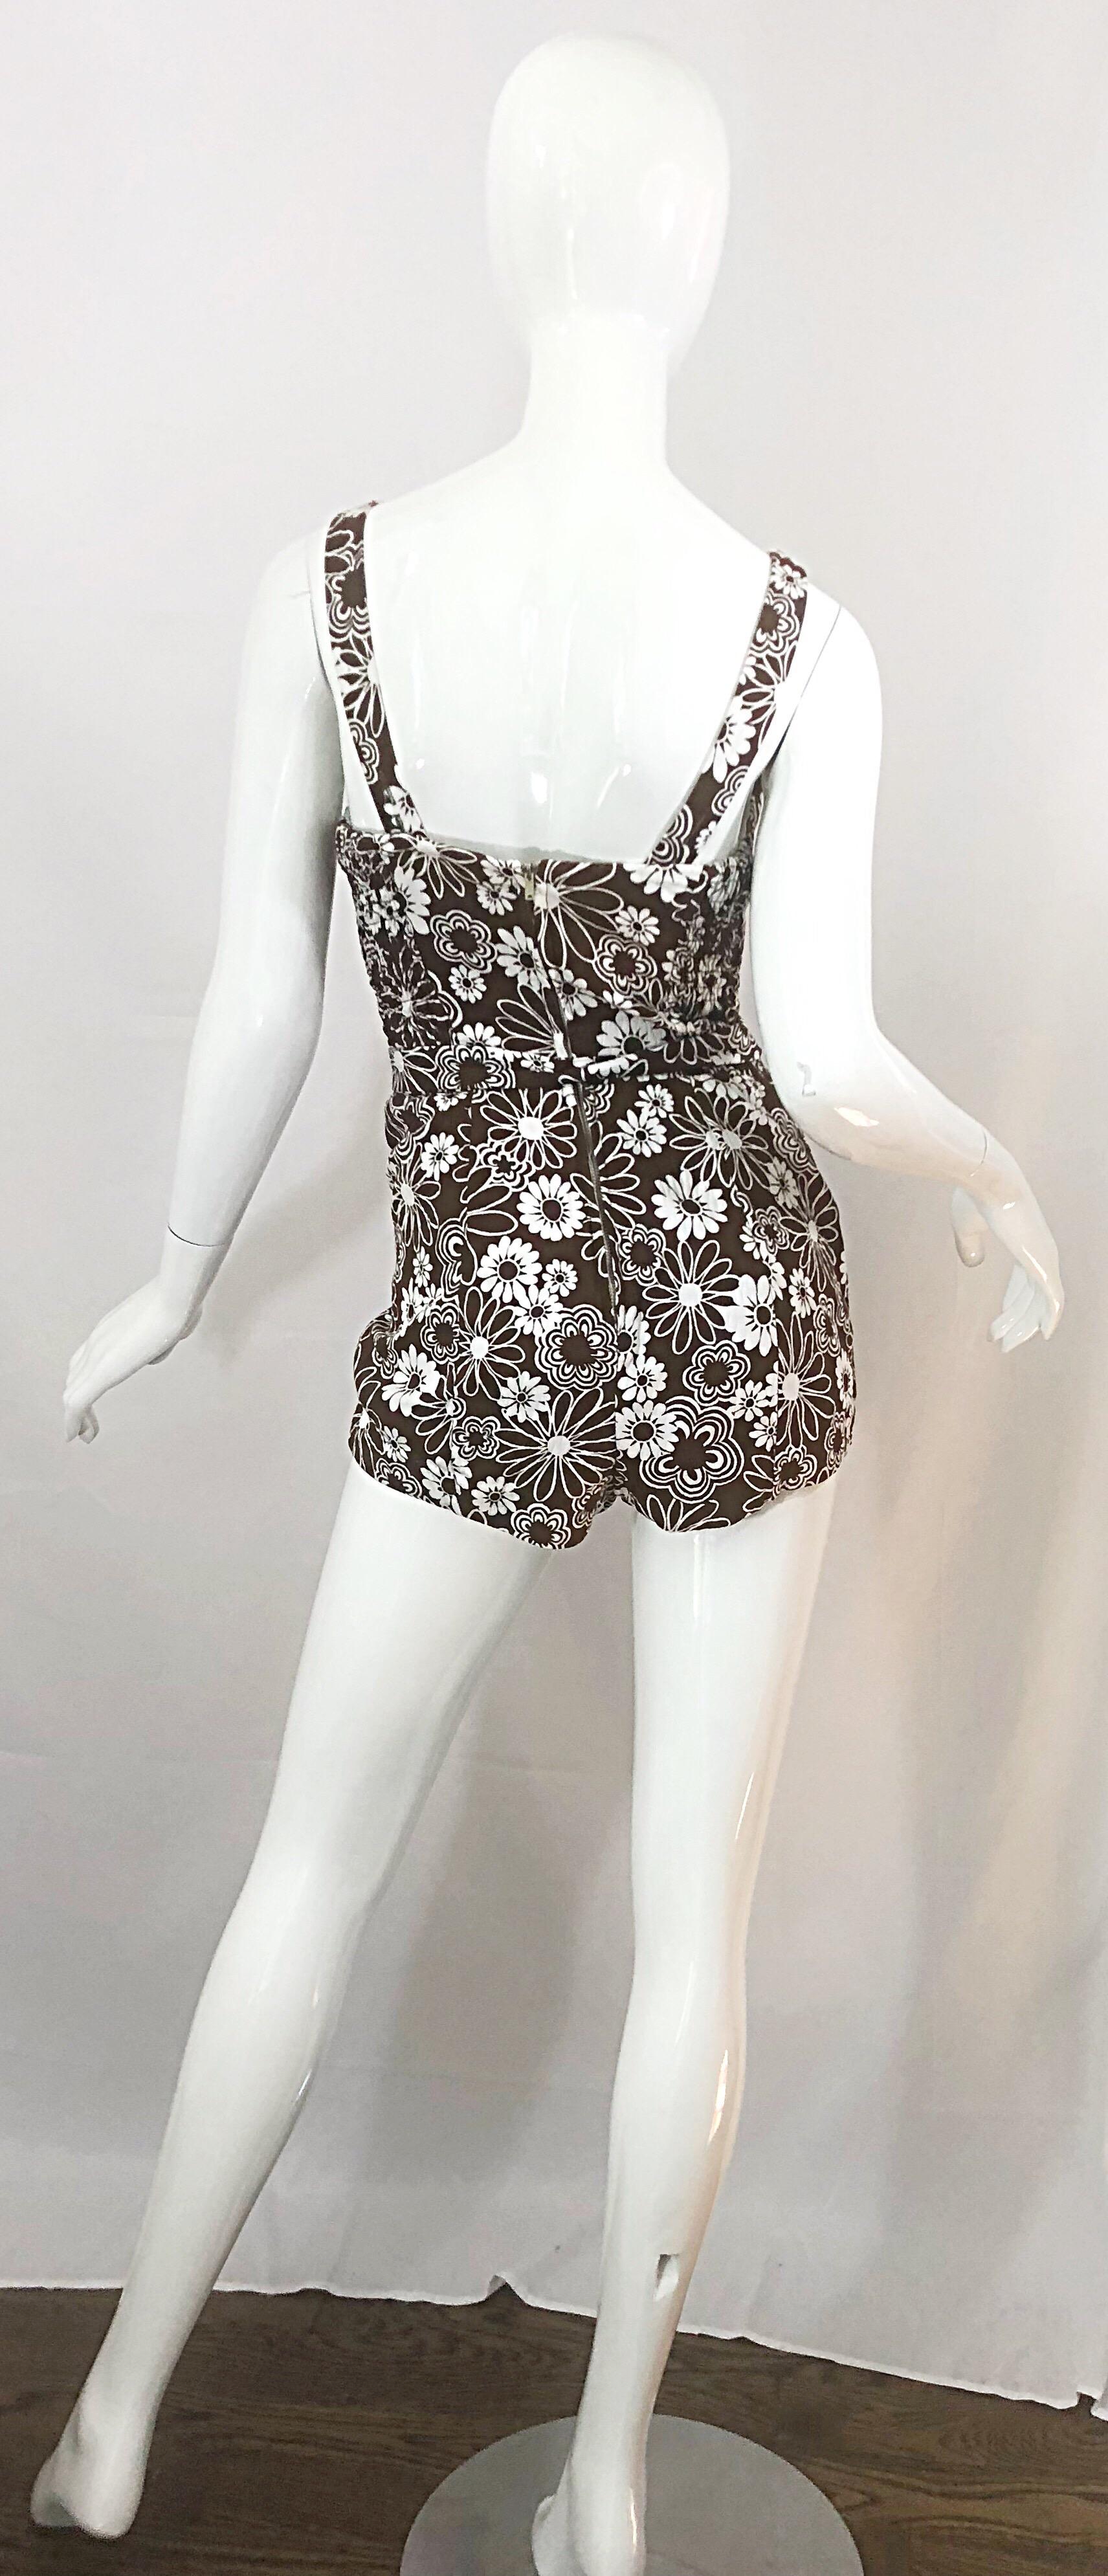 Black Chic 1960s Brown + White Belted One Piece Romper Swimsuit Vintage 60s Playsuit